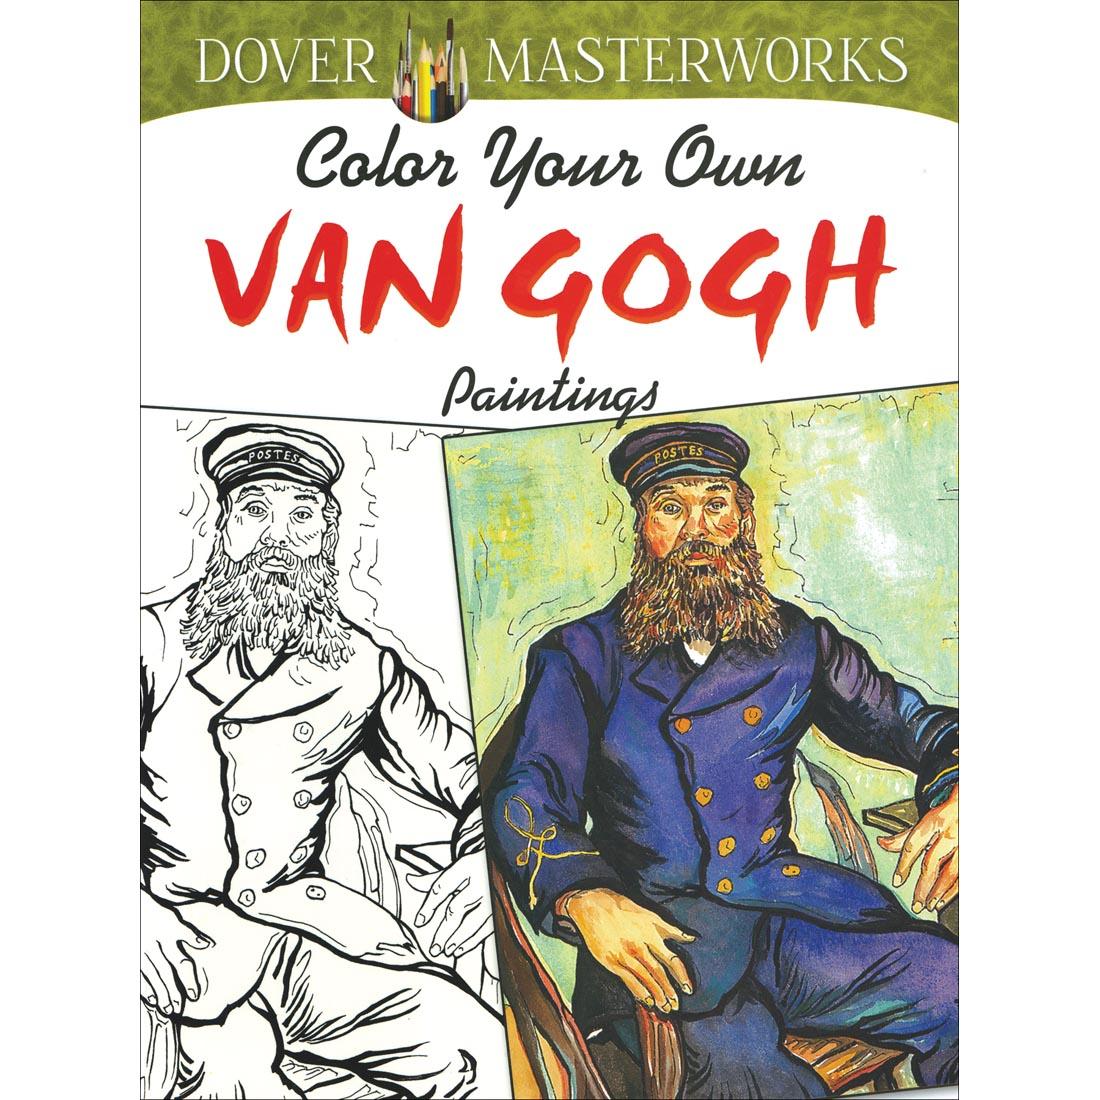 Dover Masterworks Color Your Own Van Gogh Paintings